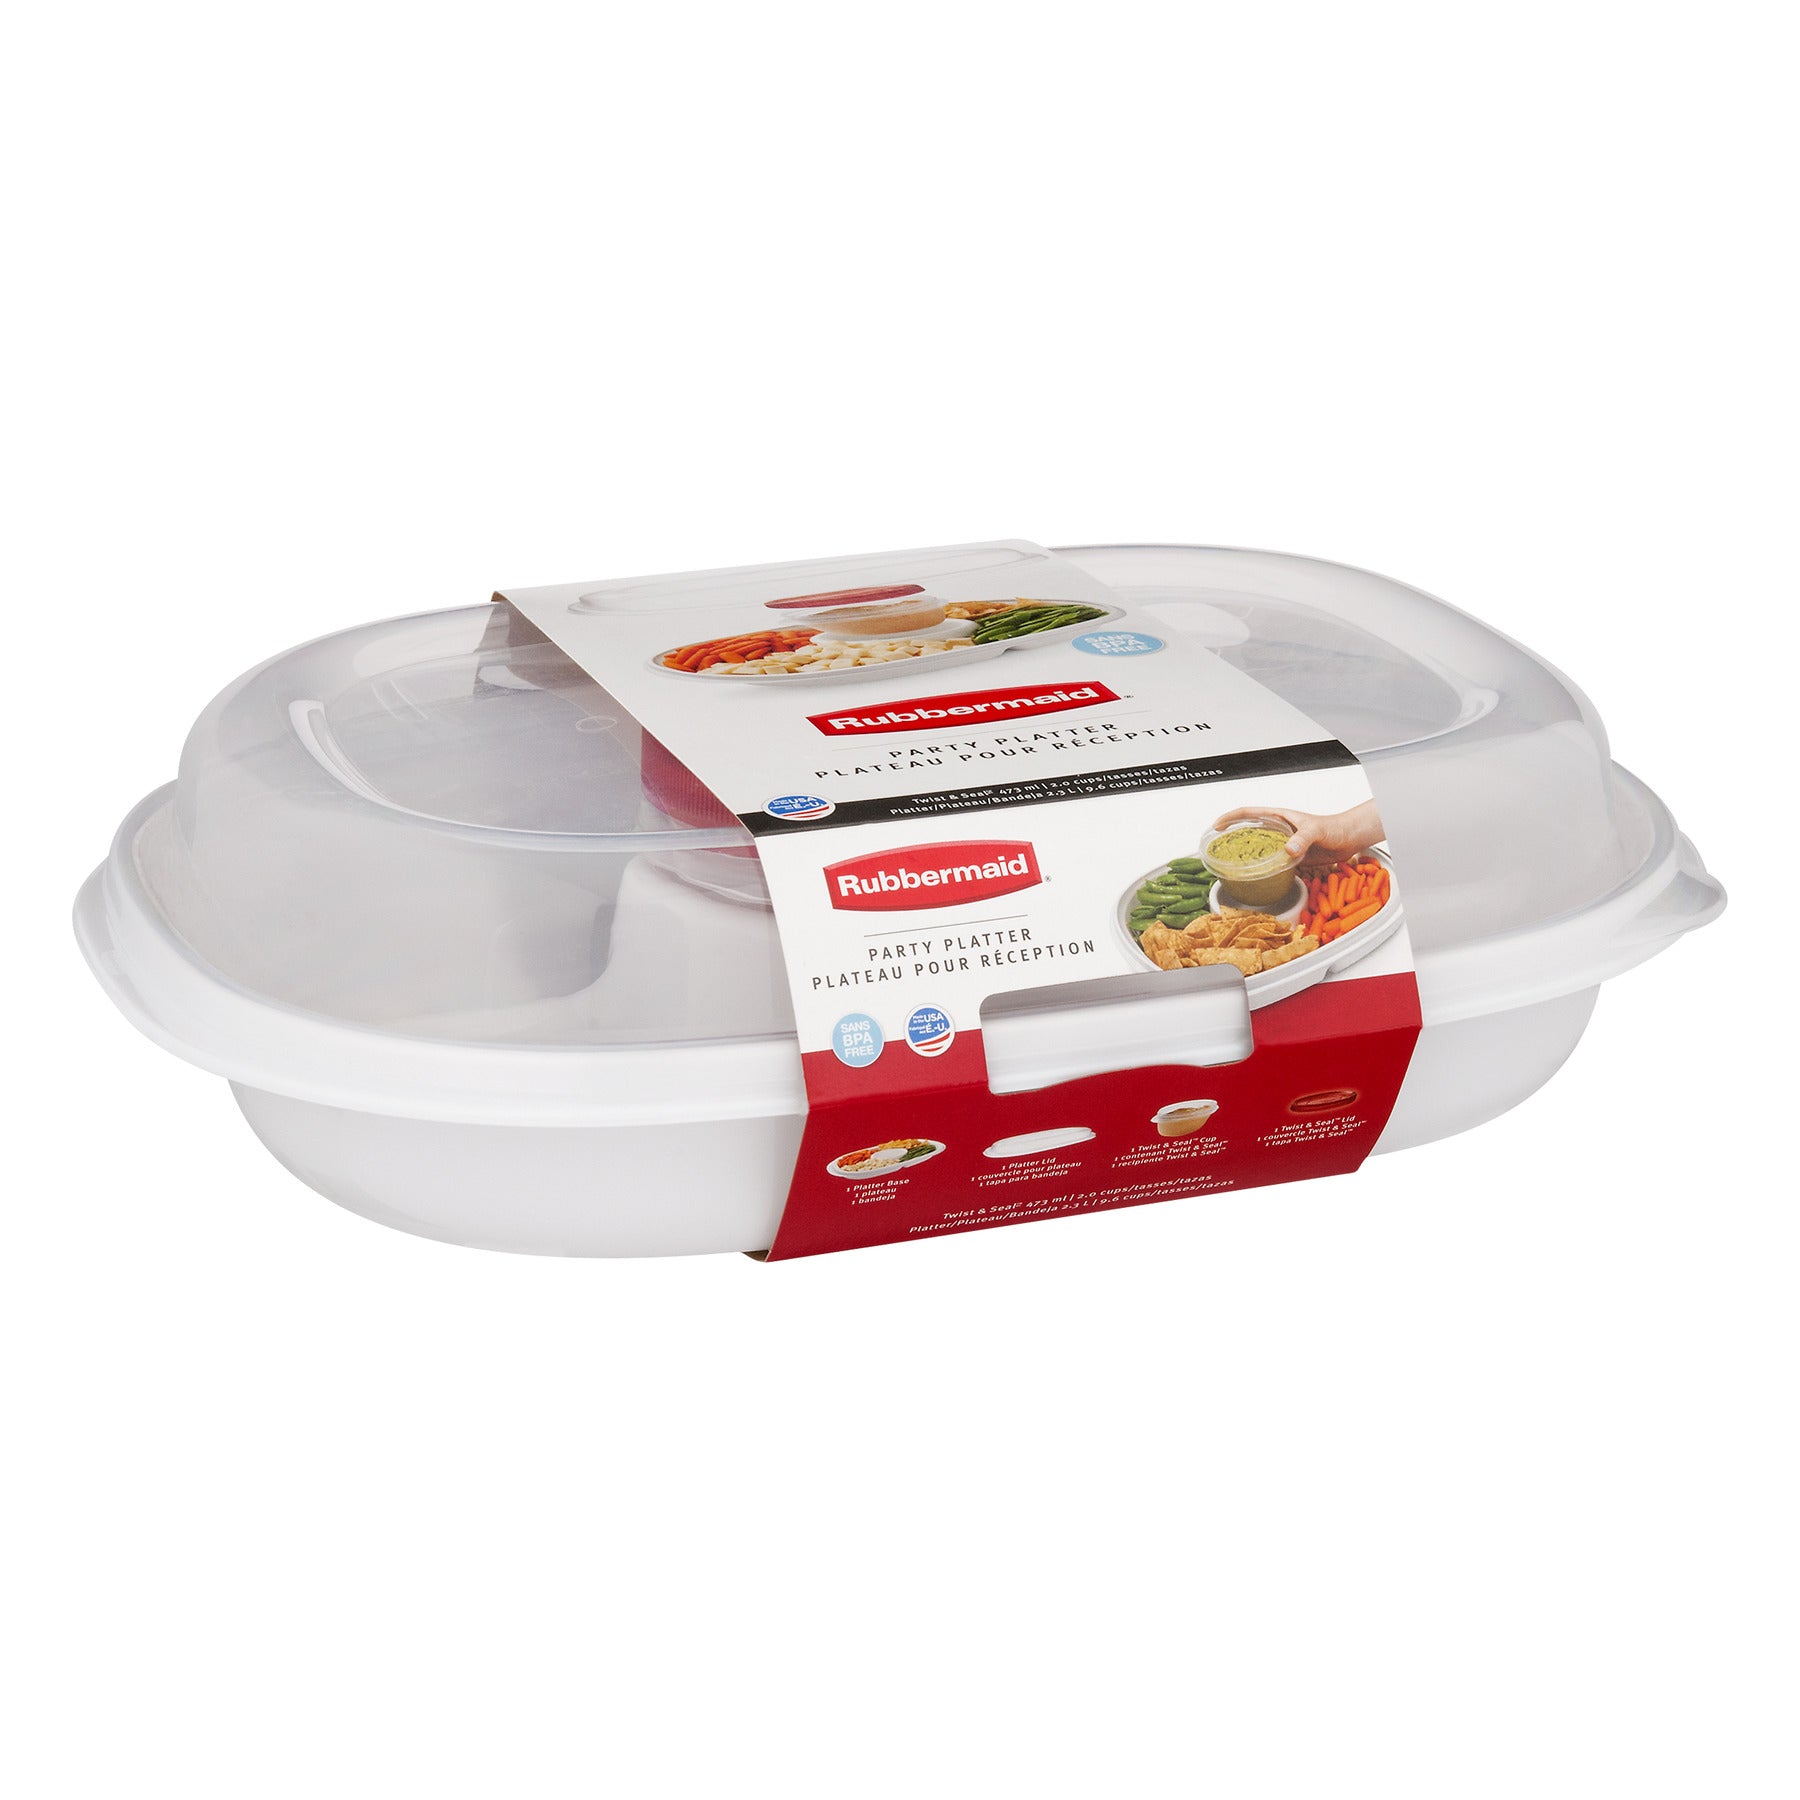 Rubbermaid Dedicated Storage Party Platter, 2.3L